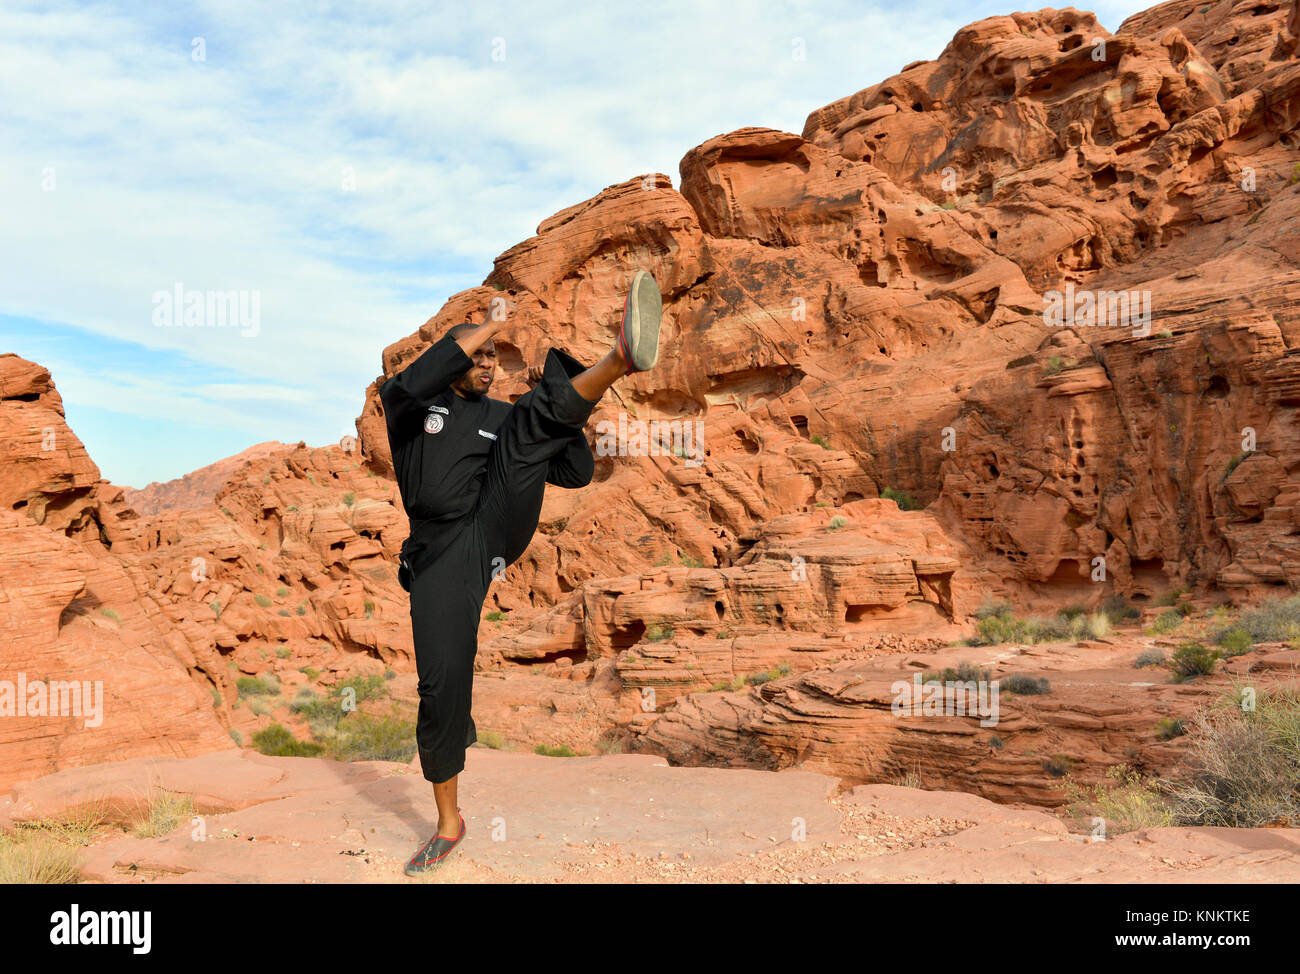 African American man practicing martial arts in the Nevada desert. Stock Photo